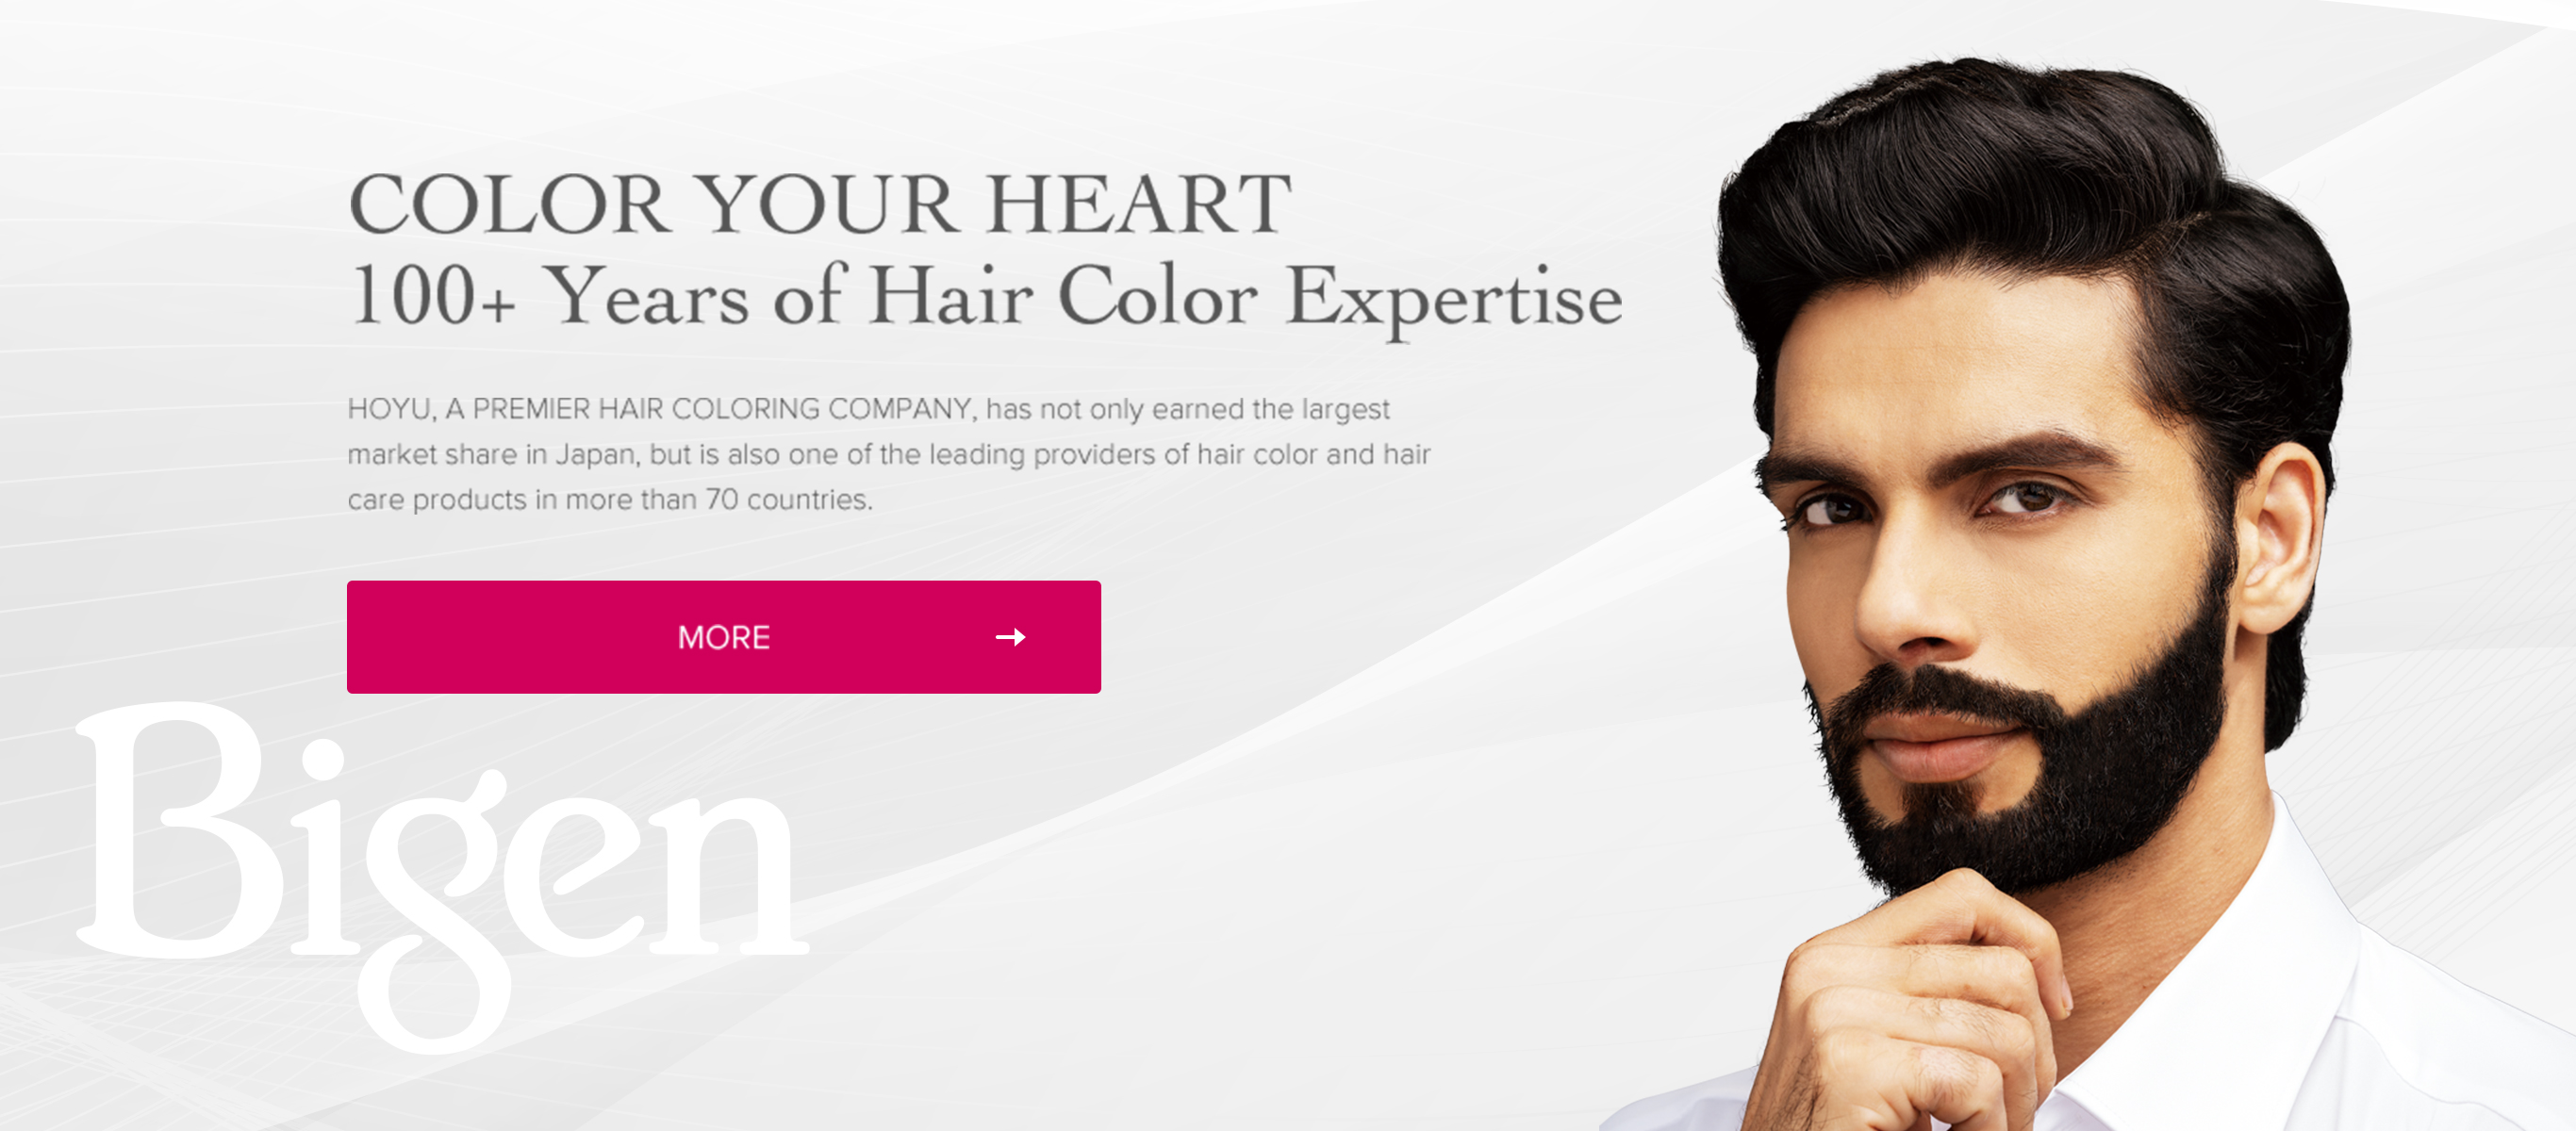 COLOR YOUR HEART 100+ Years of Hair Color Expertise